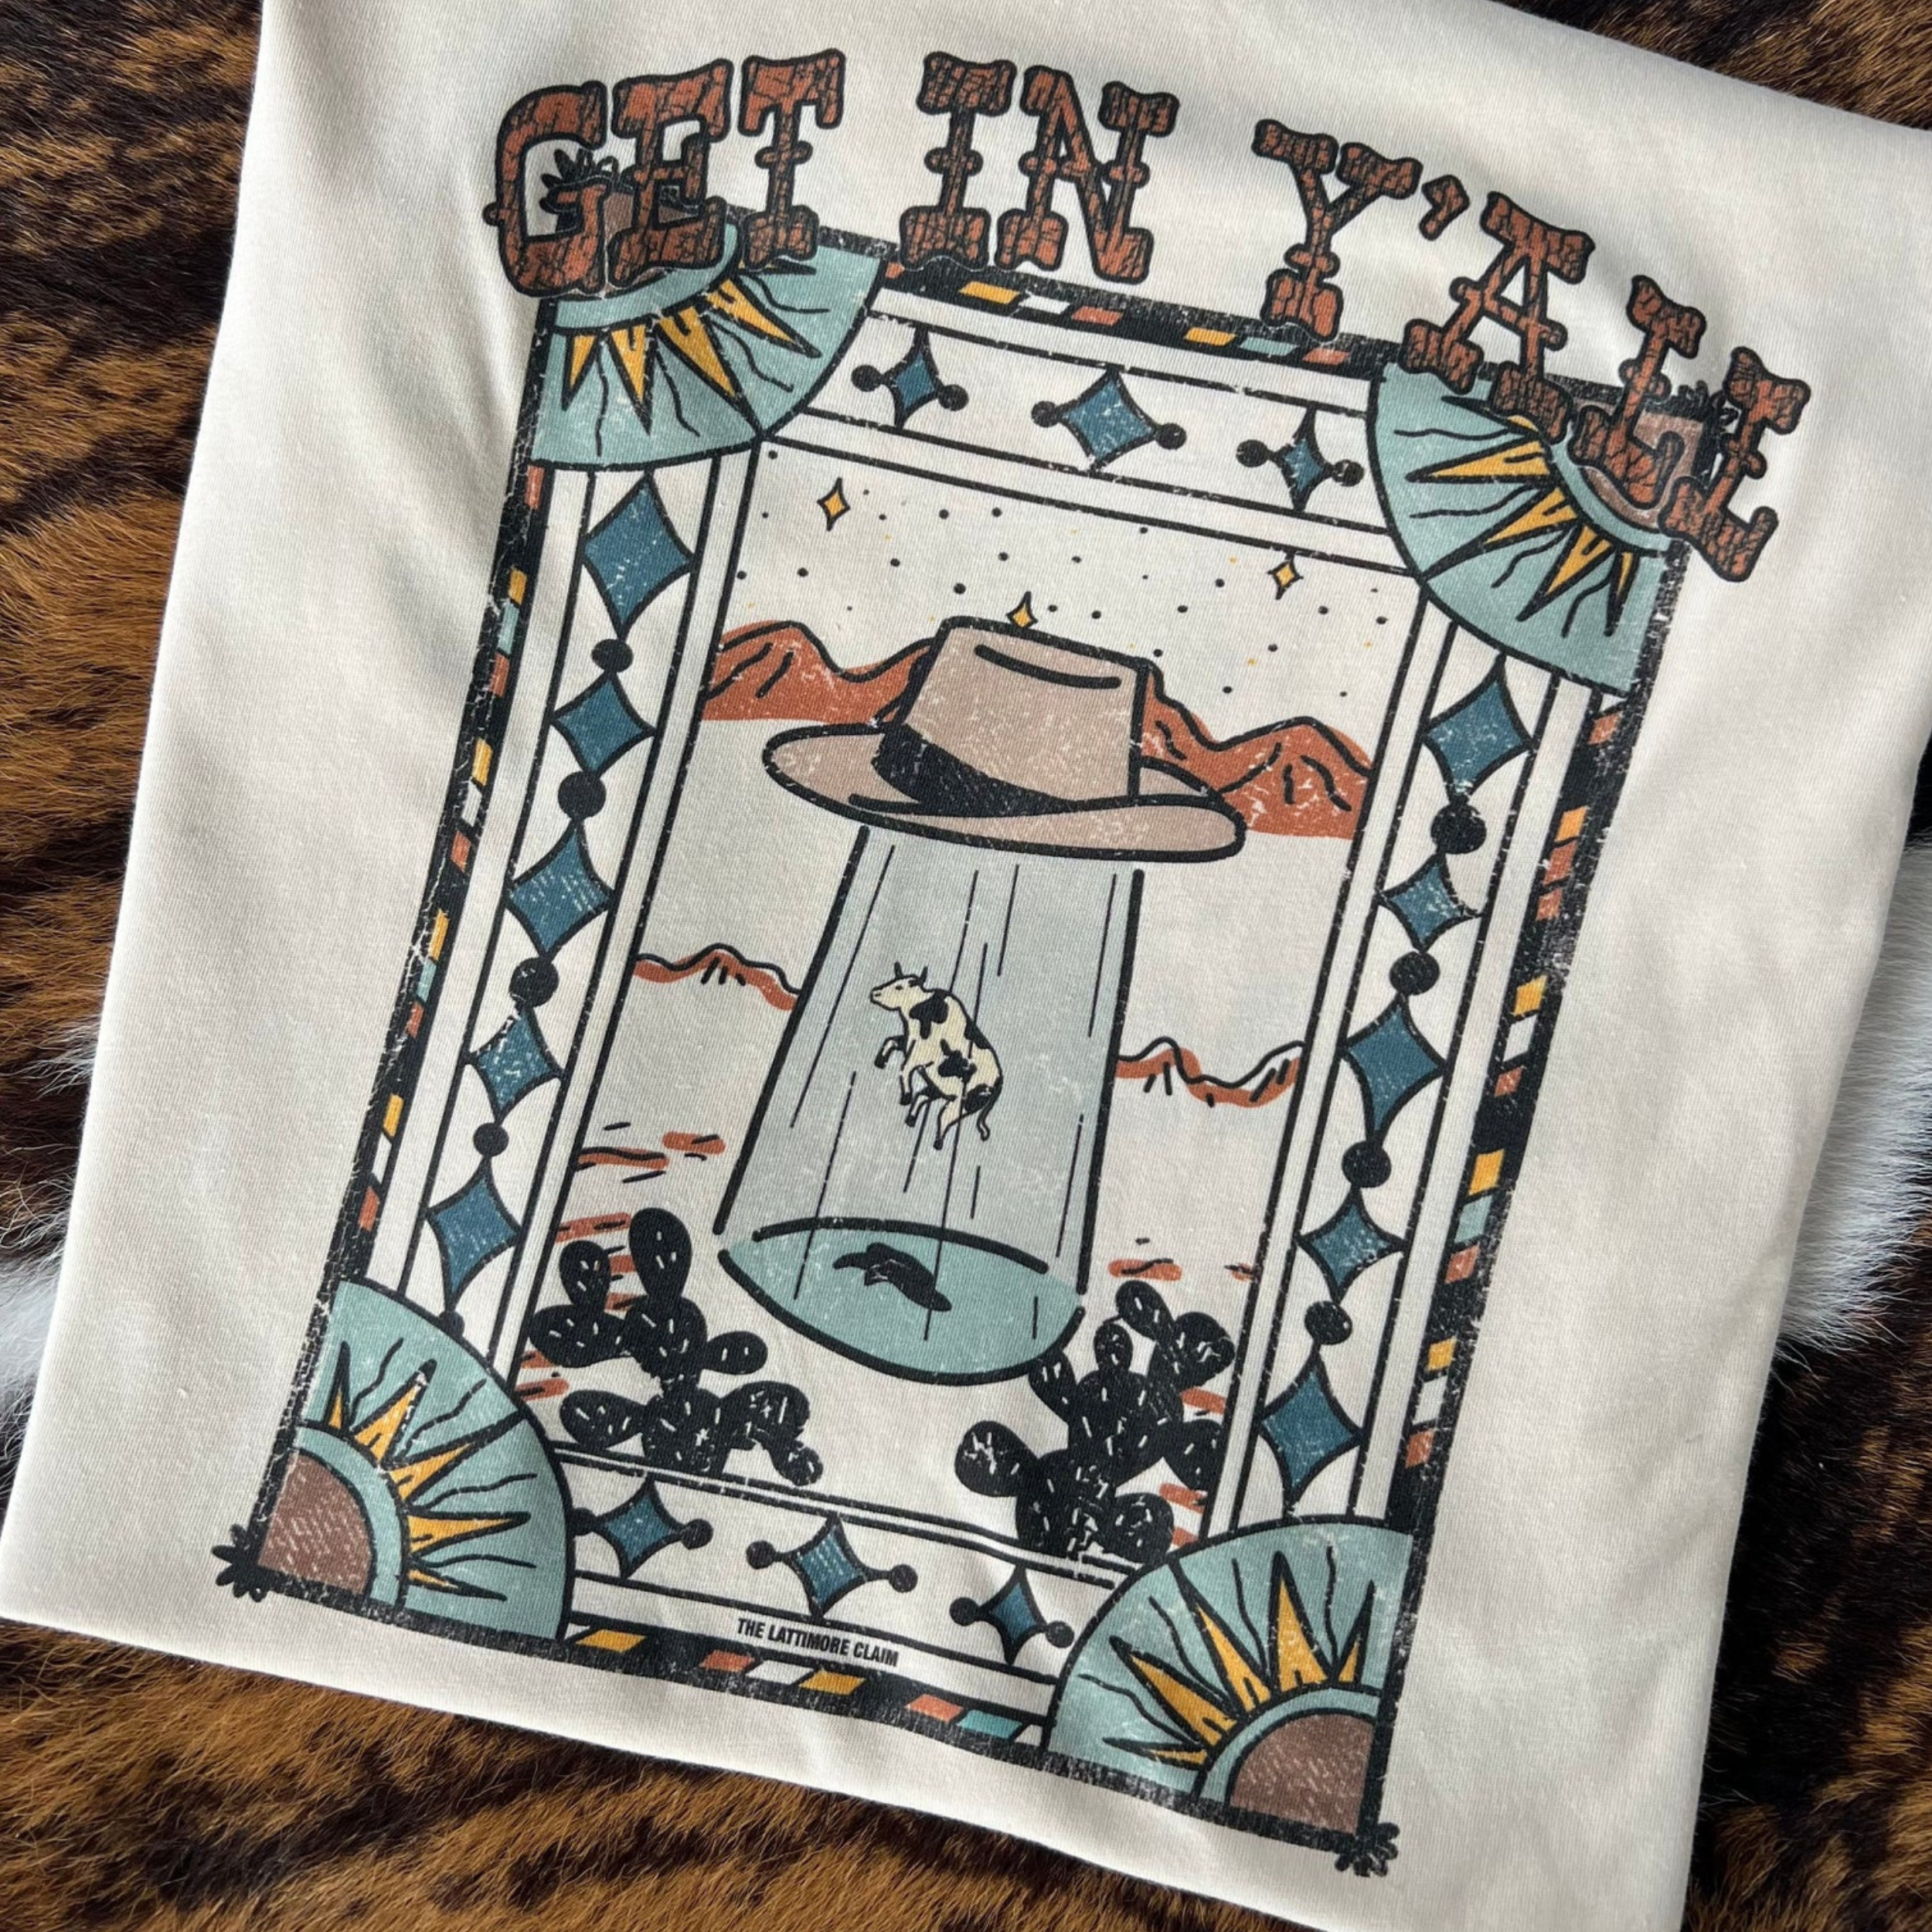 A white short sleeve crewneck tee with a graphic of a cow being abducted by a fedora in a desert. The graphic is surrounded by an artistic border of alternating colors, suns in the corners, and blue diamonds. The text "Get in yall" can be found right above the graphic in a western font. The item is pictured on a tiger print background